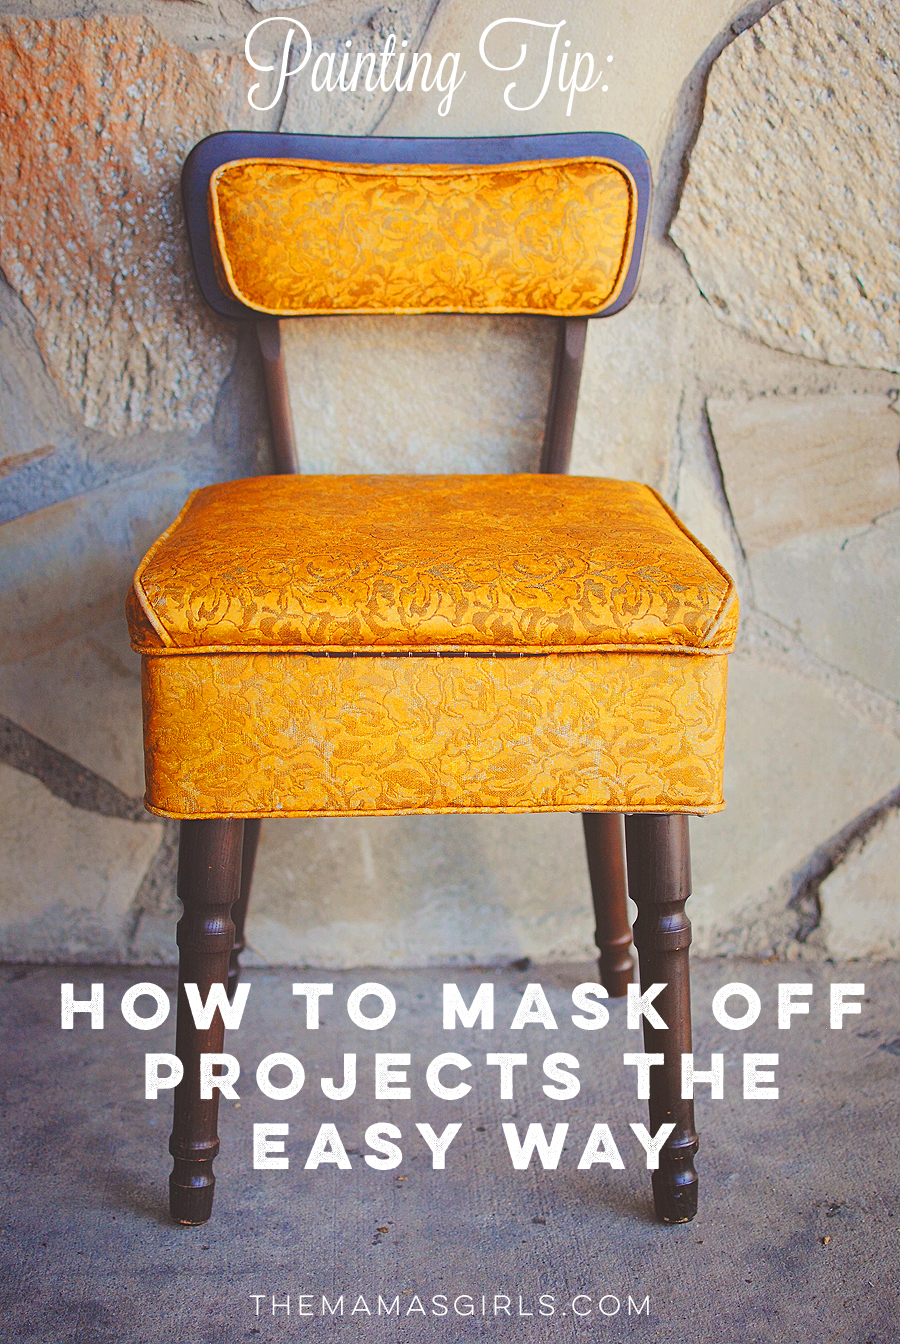 How to mask off projects the easy way - clever painting tip